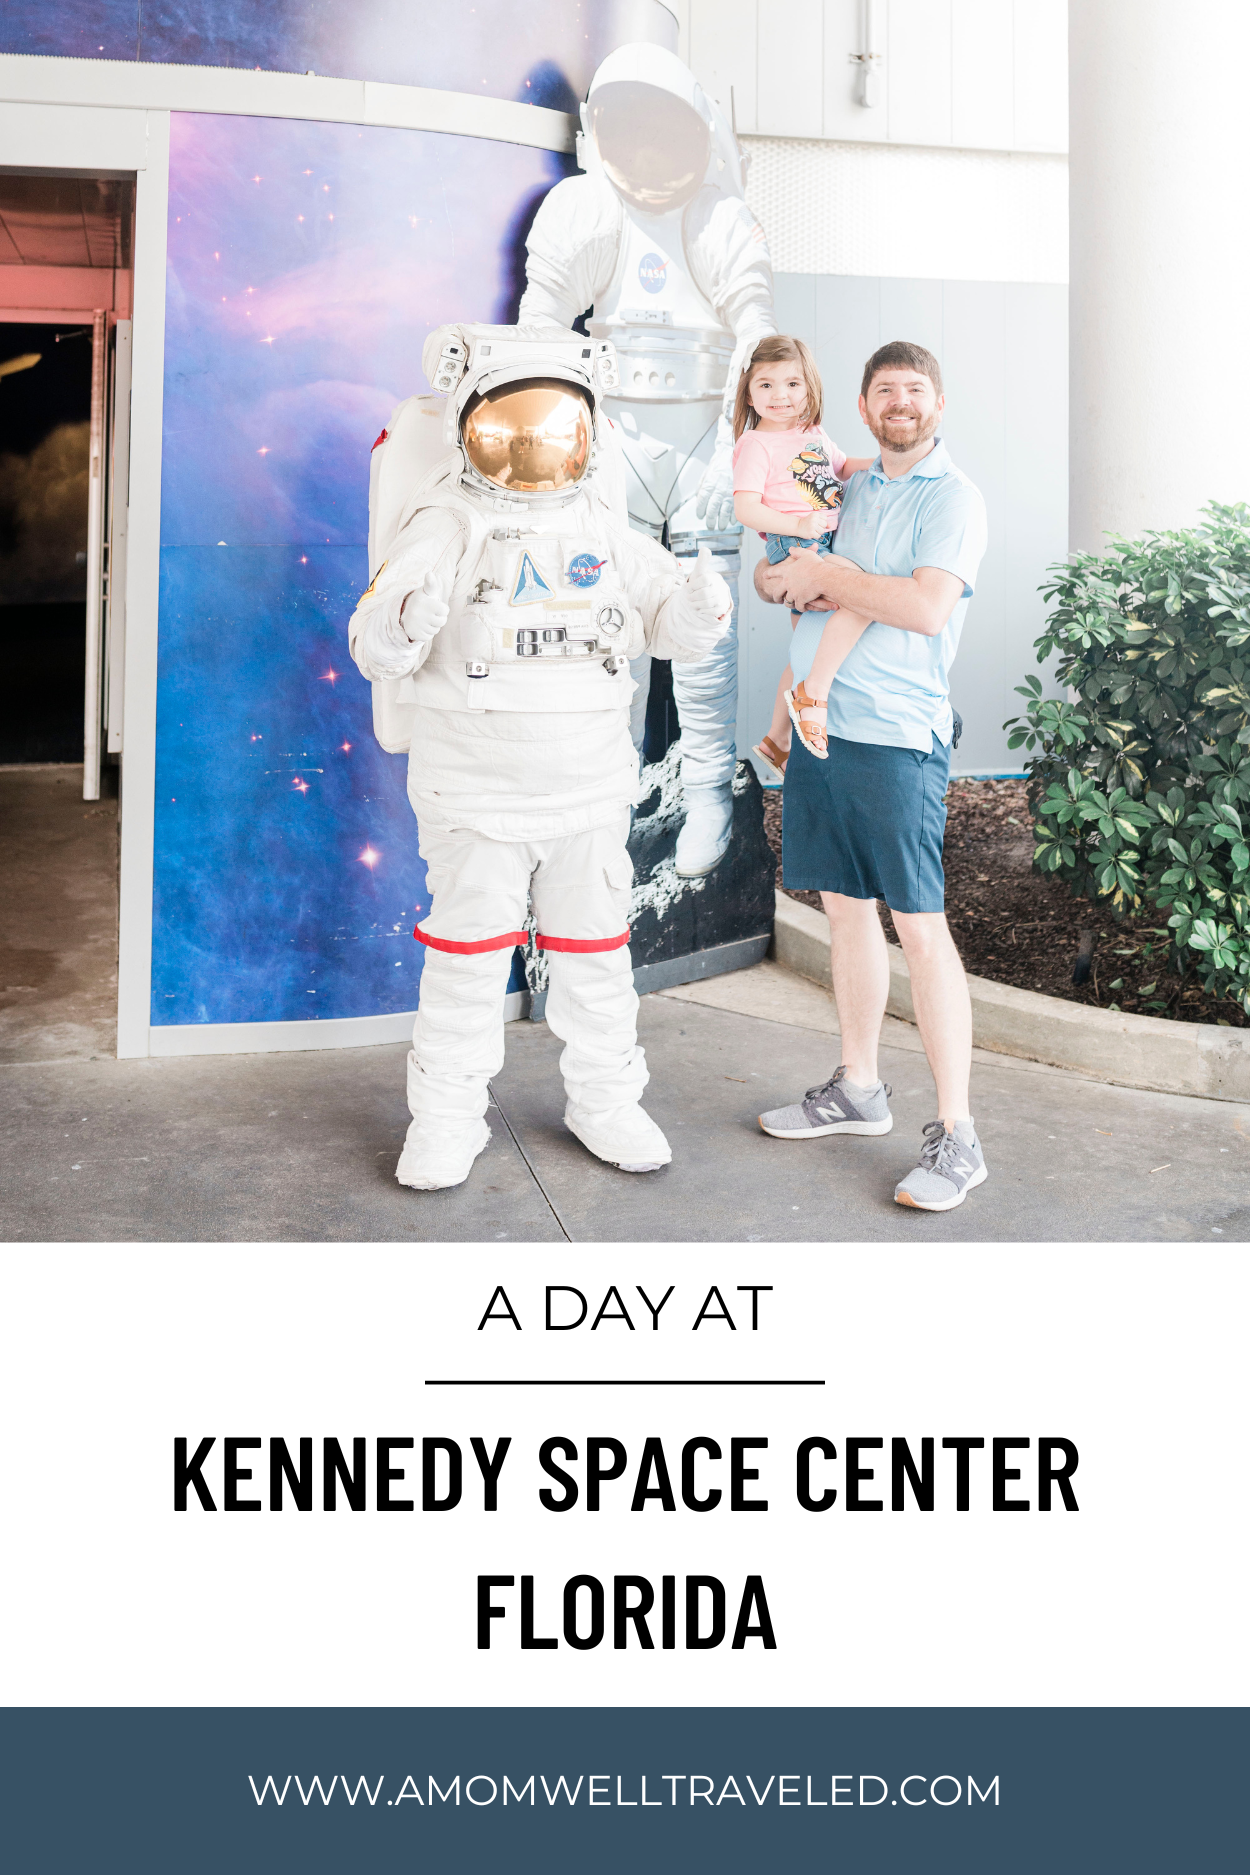 John Naylor and Daughter with astronaut at the Kennedy Space Center Orlando Florida